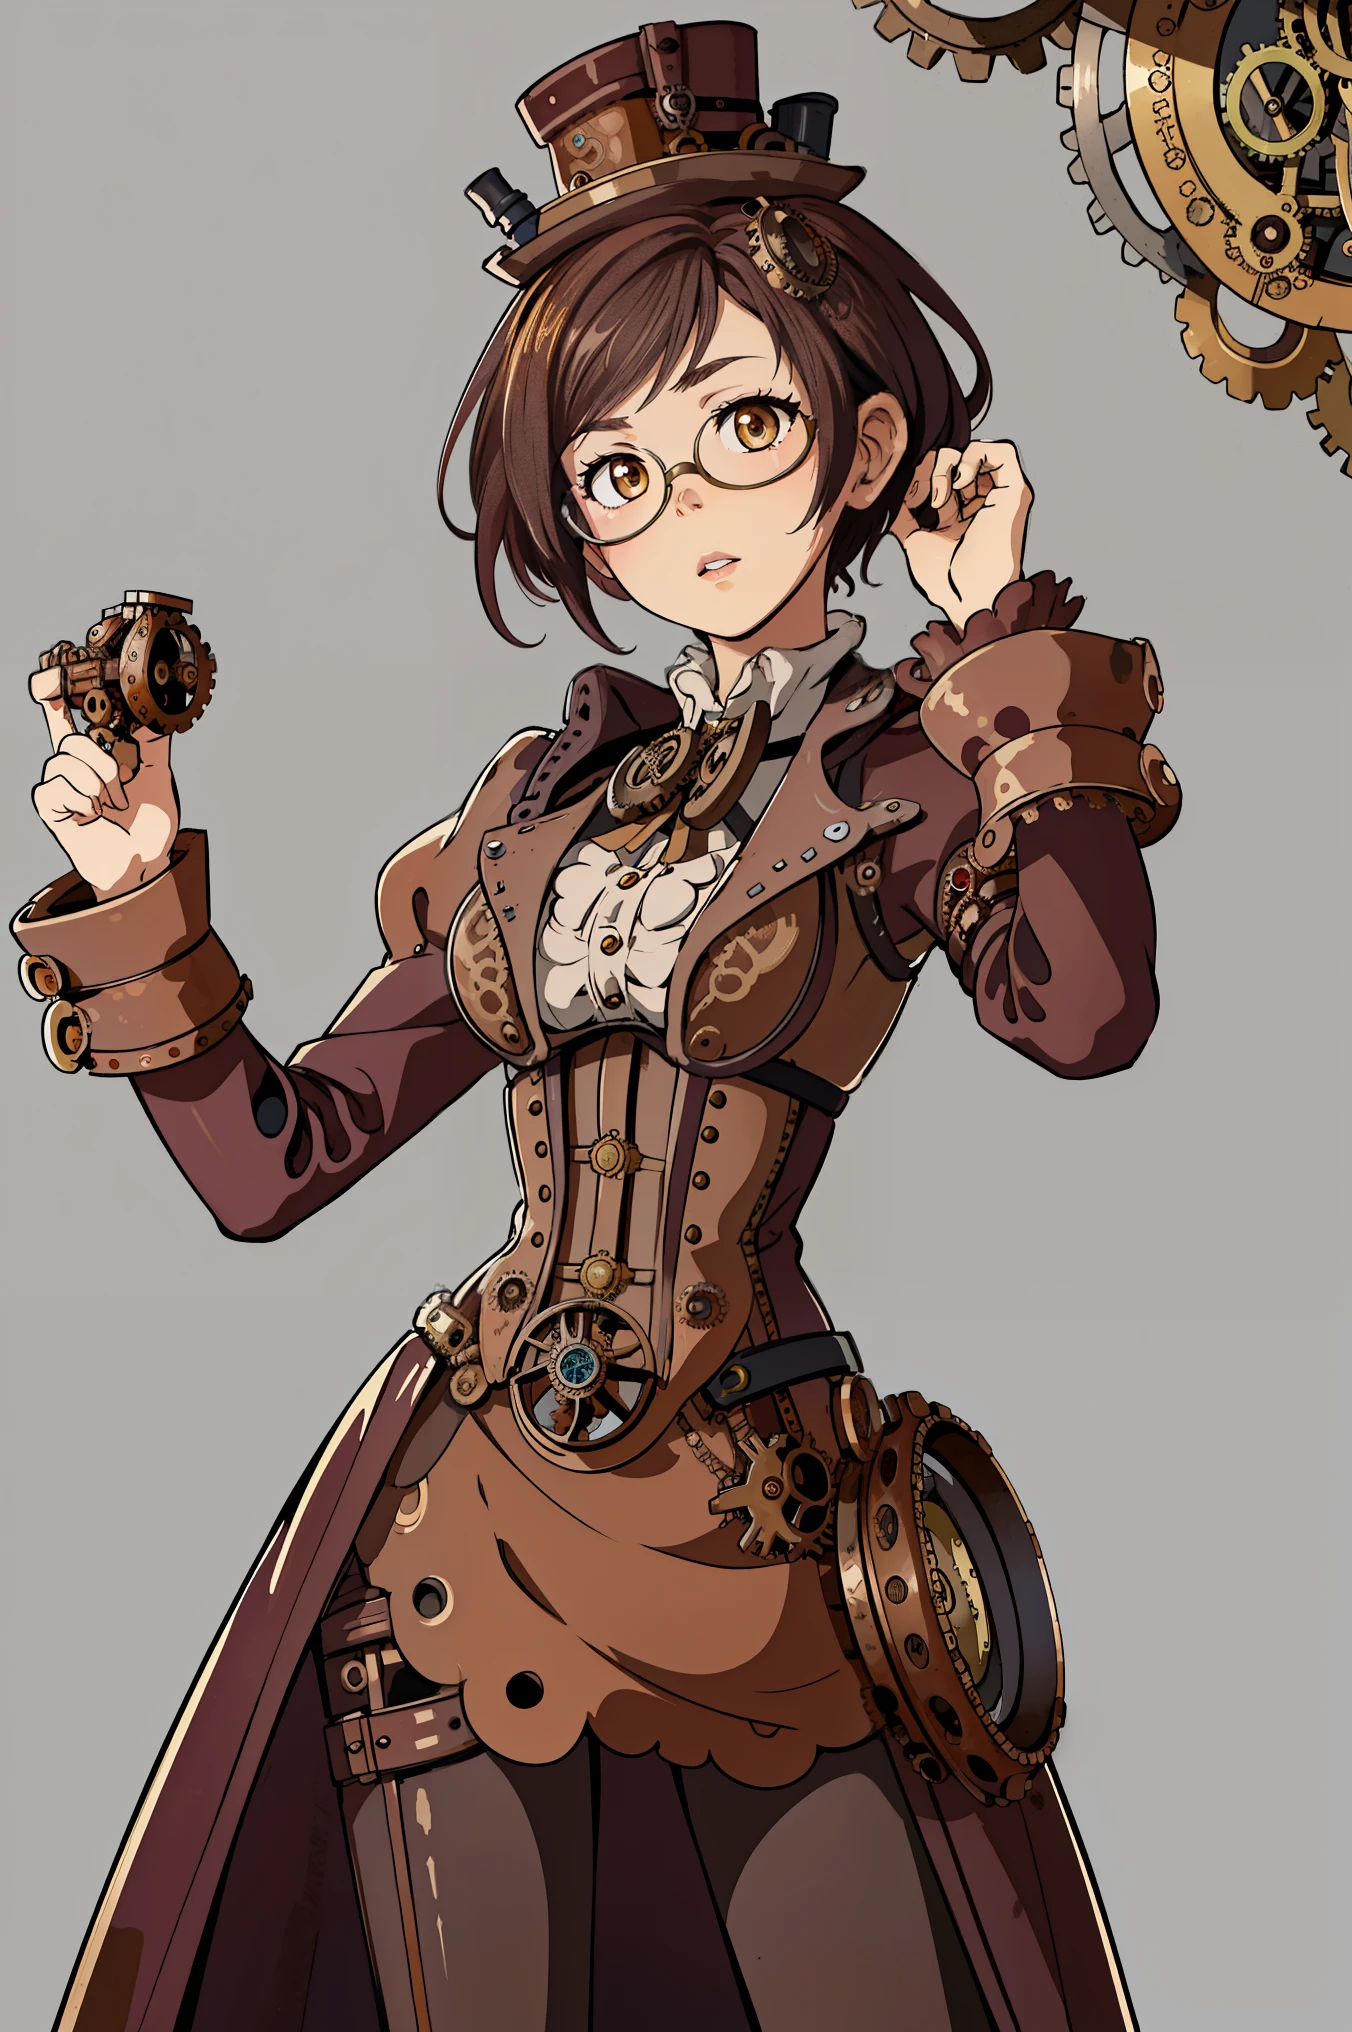 1 girl, close up, details Intricate, (Steampunk:1.4), mechanical arms, glasses, Messy hair, glasses on head, victorian dress, (art nouveau), gears Steampunk, gears, machinery